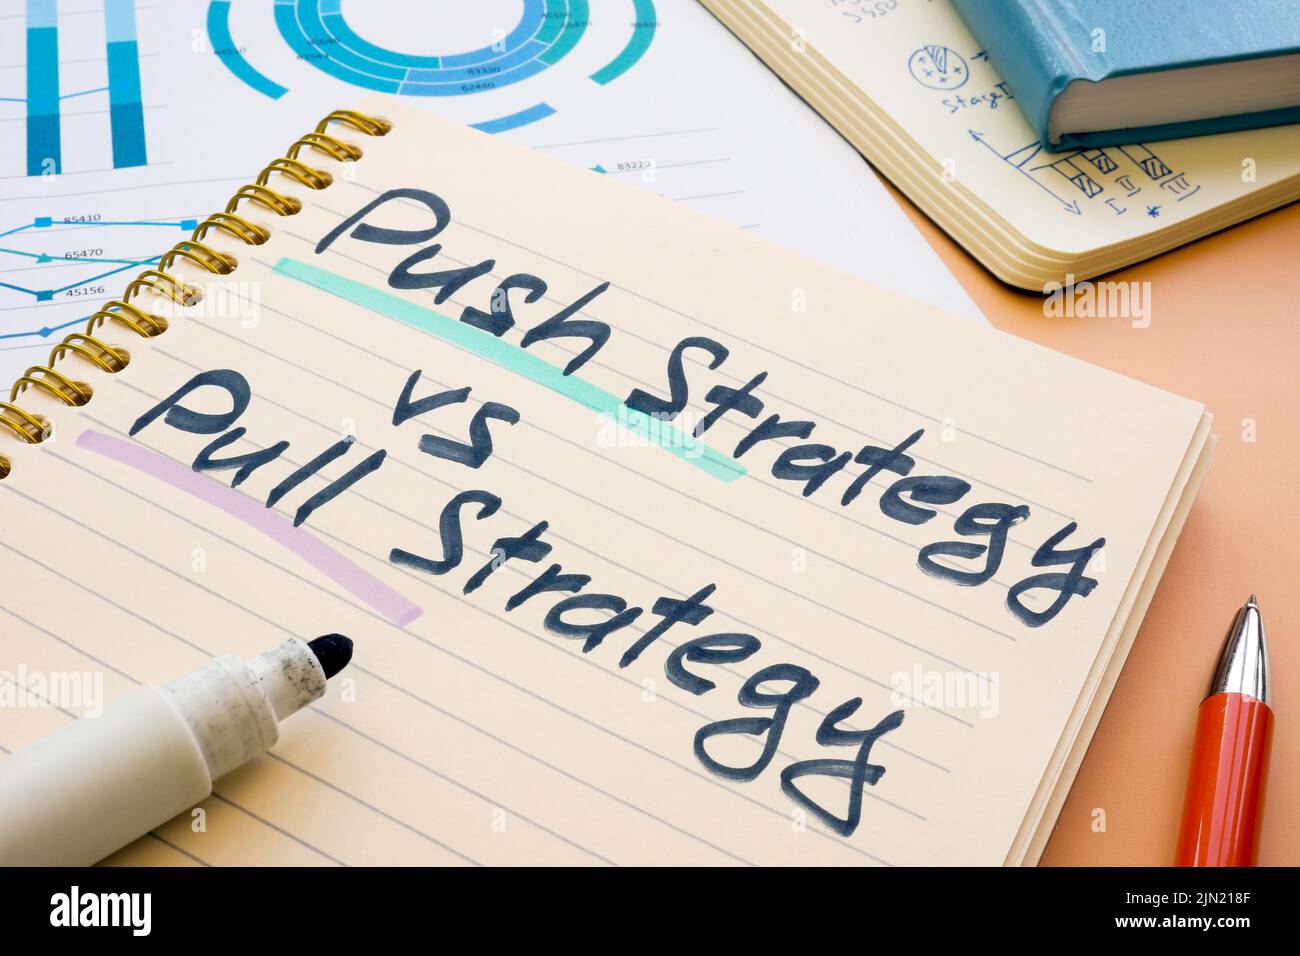 Push strategy vs pull strategy phrase in the notebook. Stock Photo